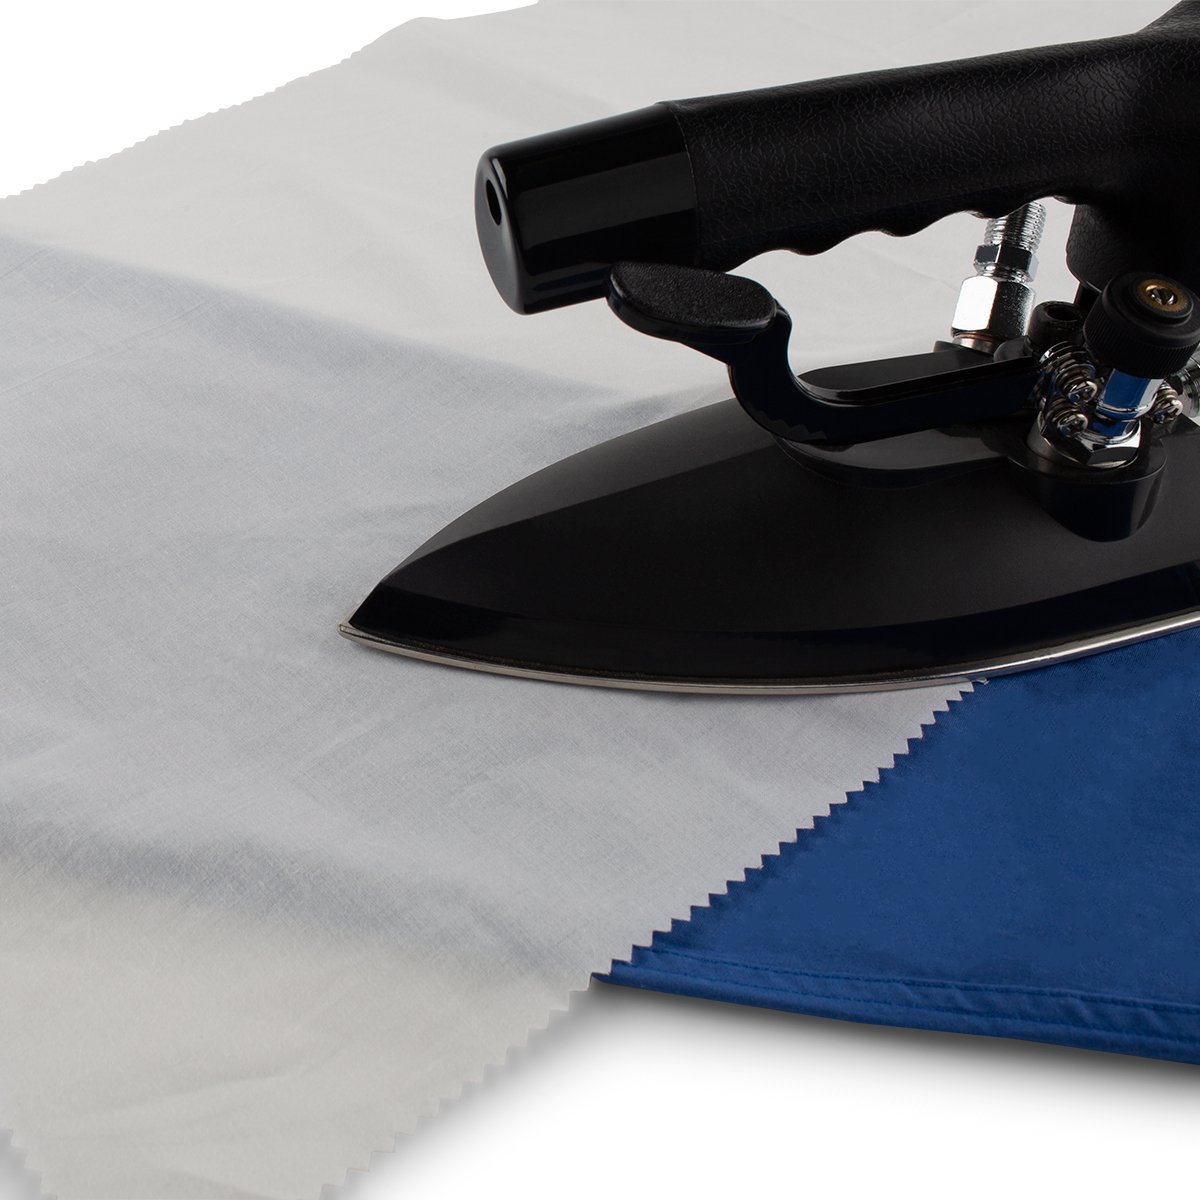 EZE-VIEW PRESSING CLOTH [PC-232] - $6.99 : American Sewing Supply, Pay  Less, Buy More